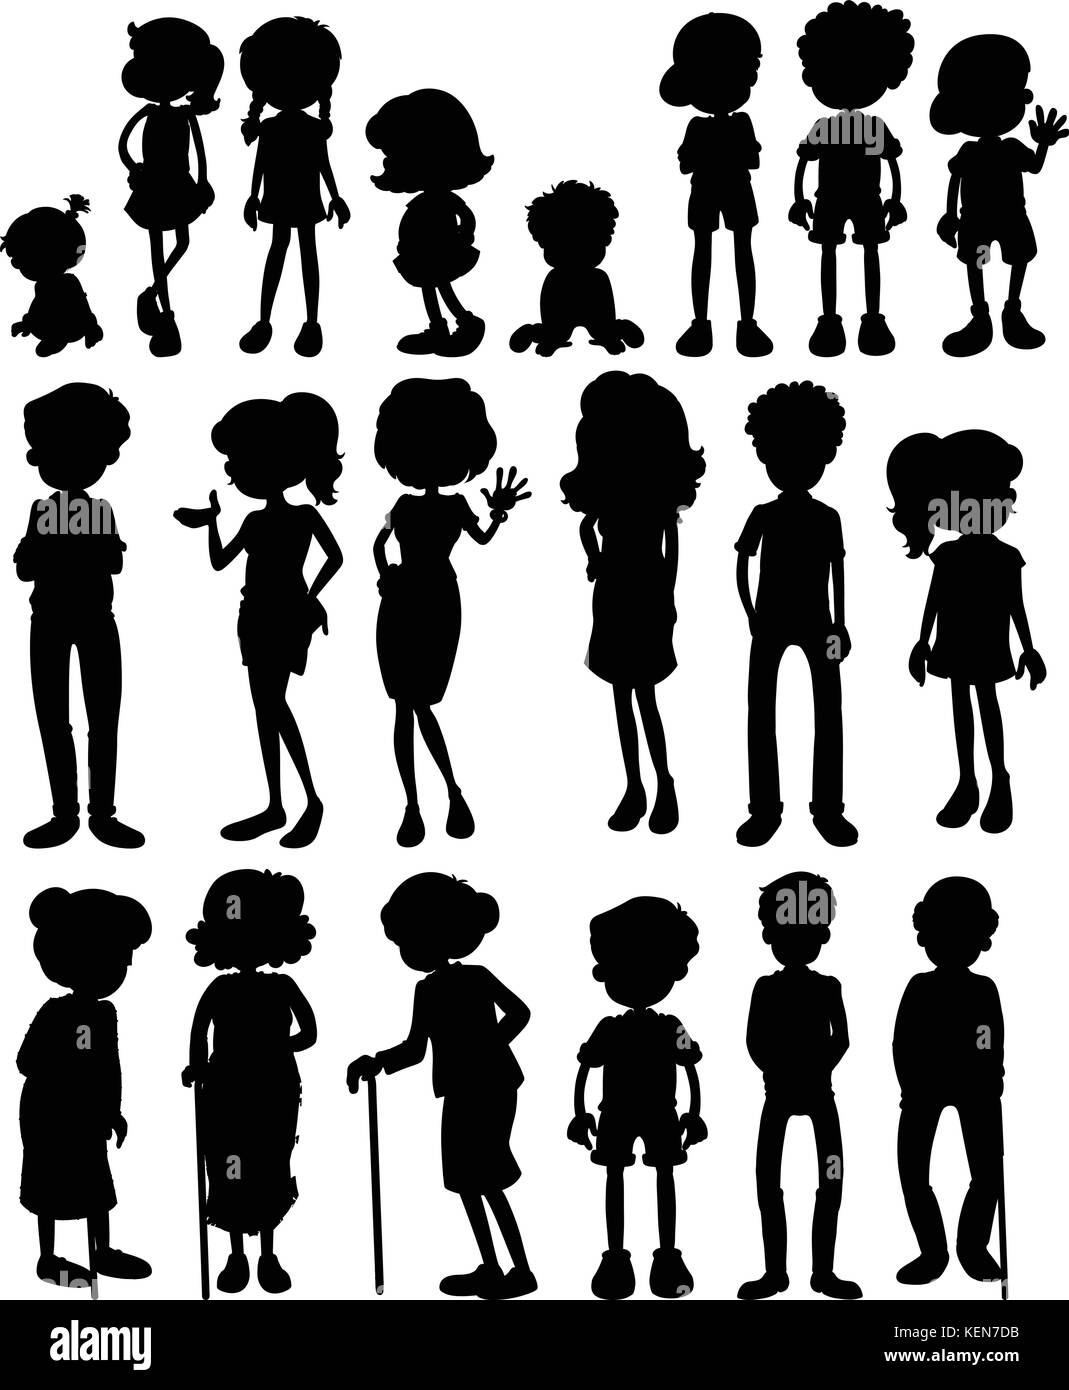 Illustration of silhouette of many people Stock Vector